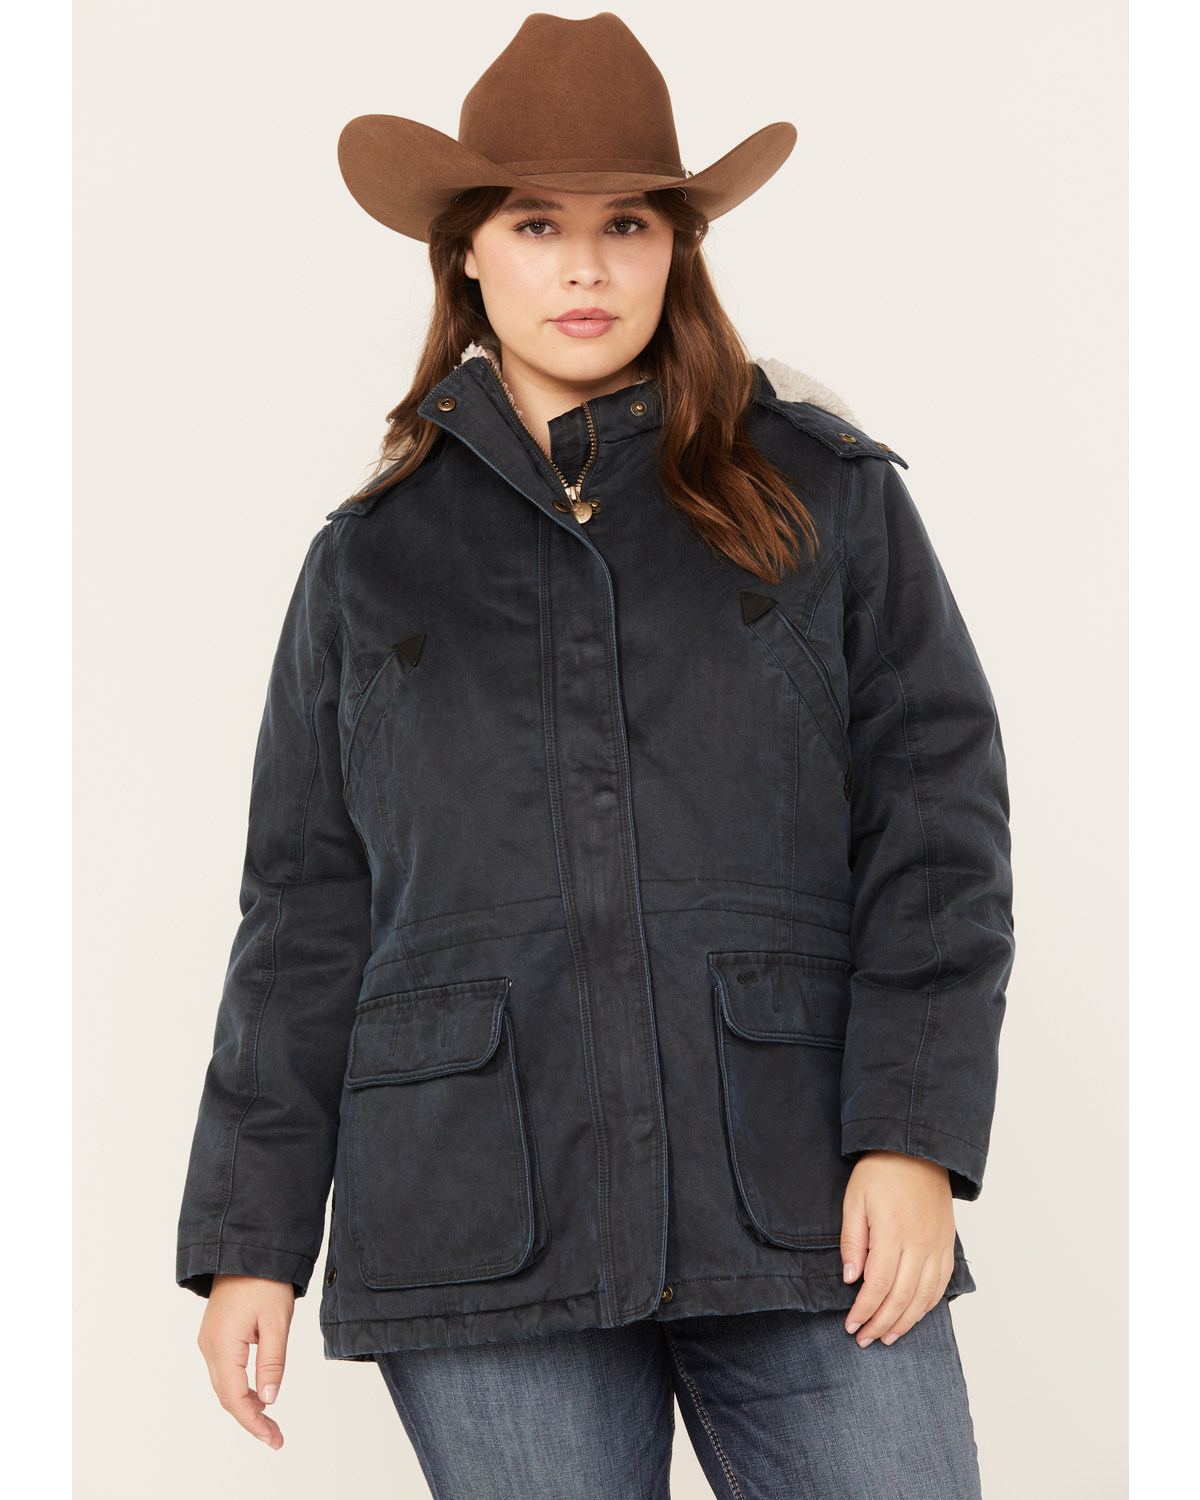 Outback Trading Co. Women's Woodbury Sherpa-Lined Hooded Jacket - Plus